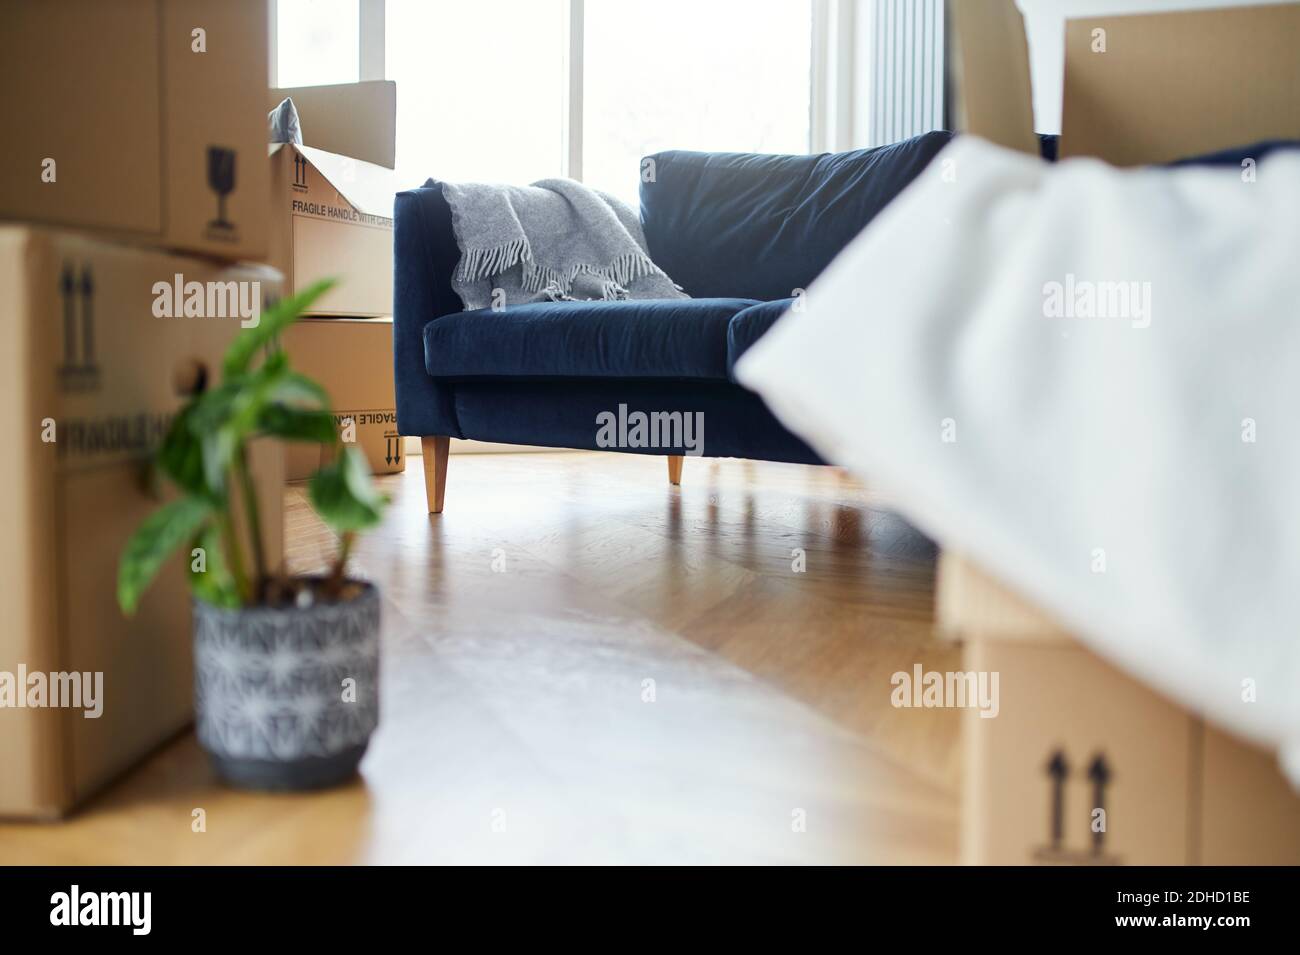 Close up of stacked removal boxes and house plants in lounge ready for moving in or moving out of home Stock Photo